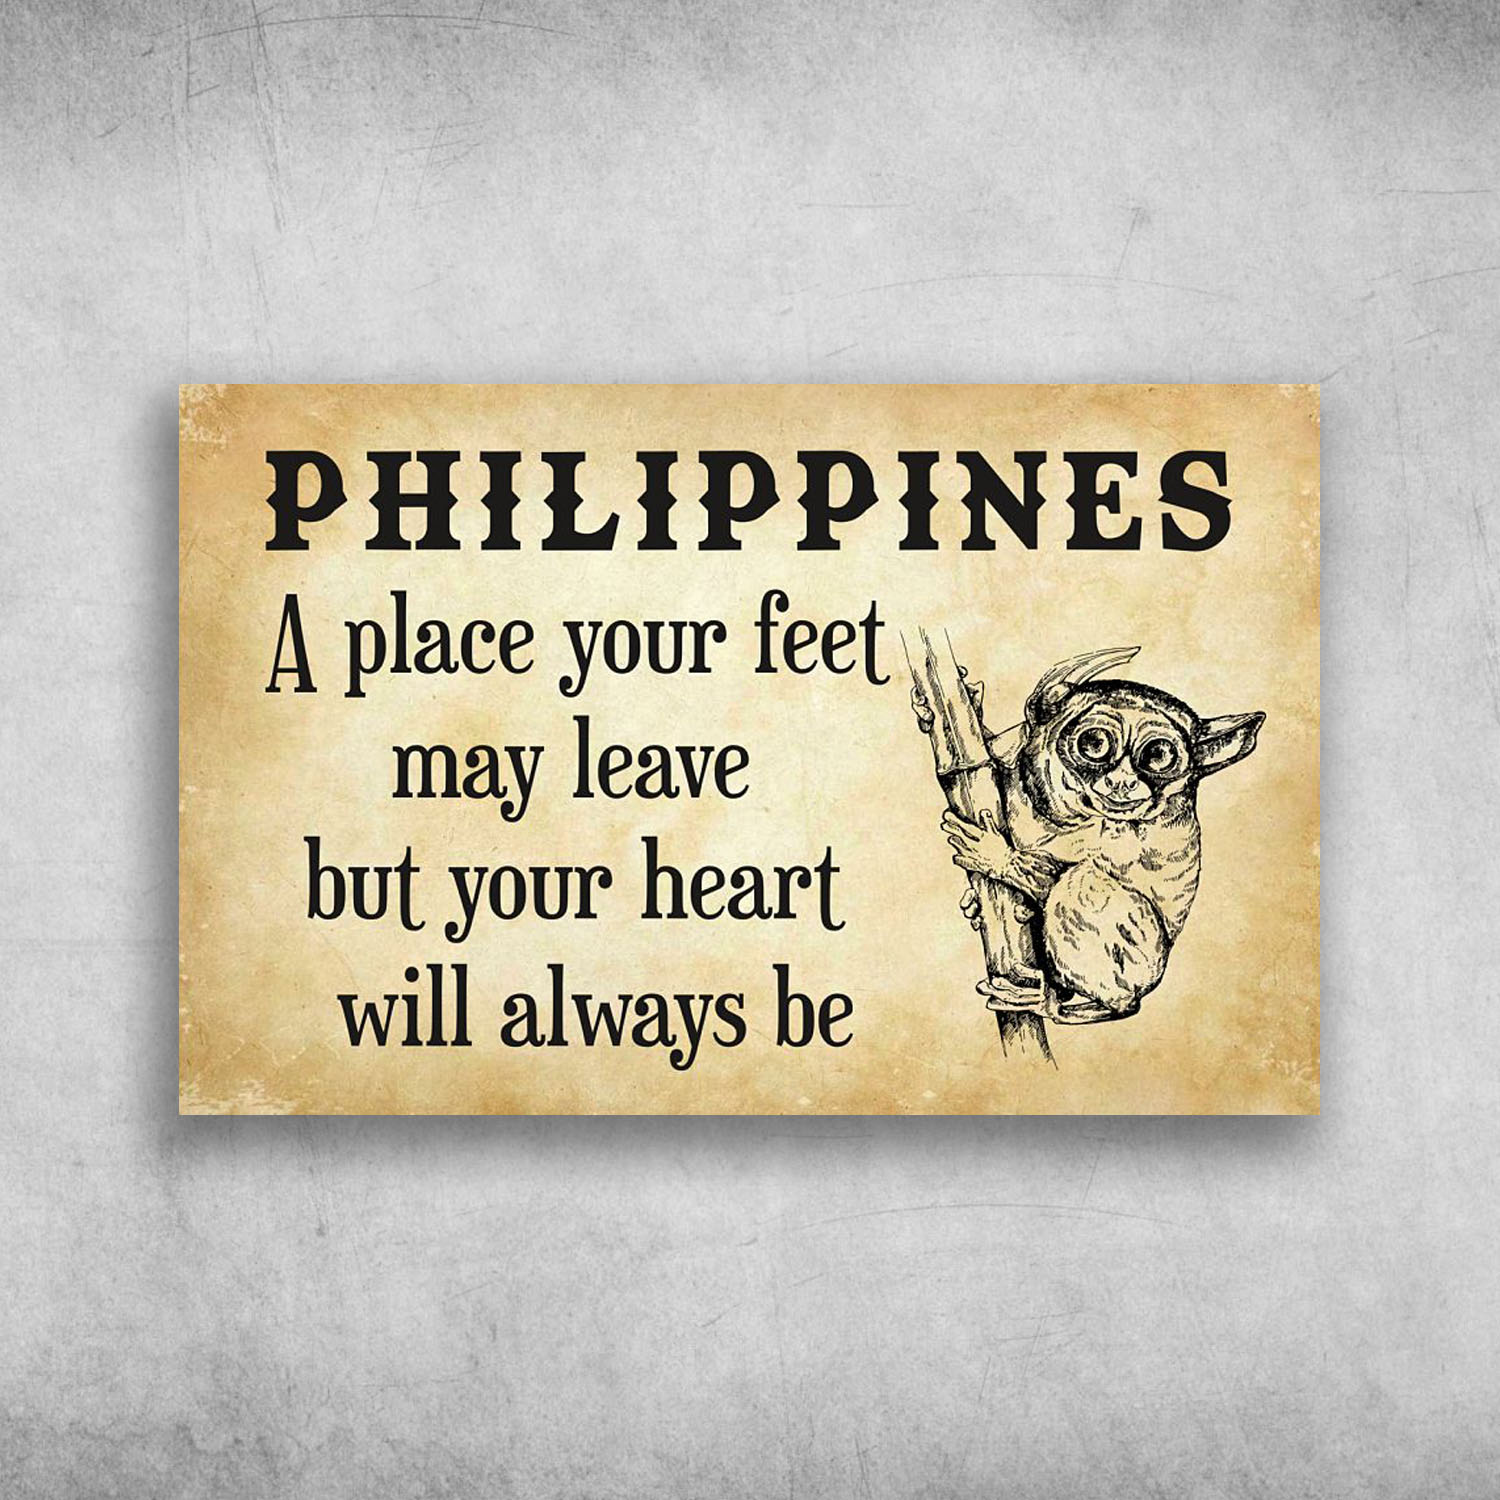 Philippines A Place Your Feet May Leave